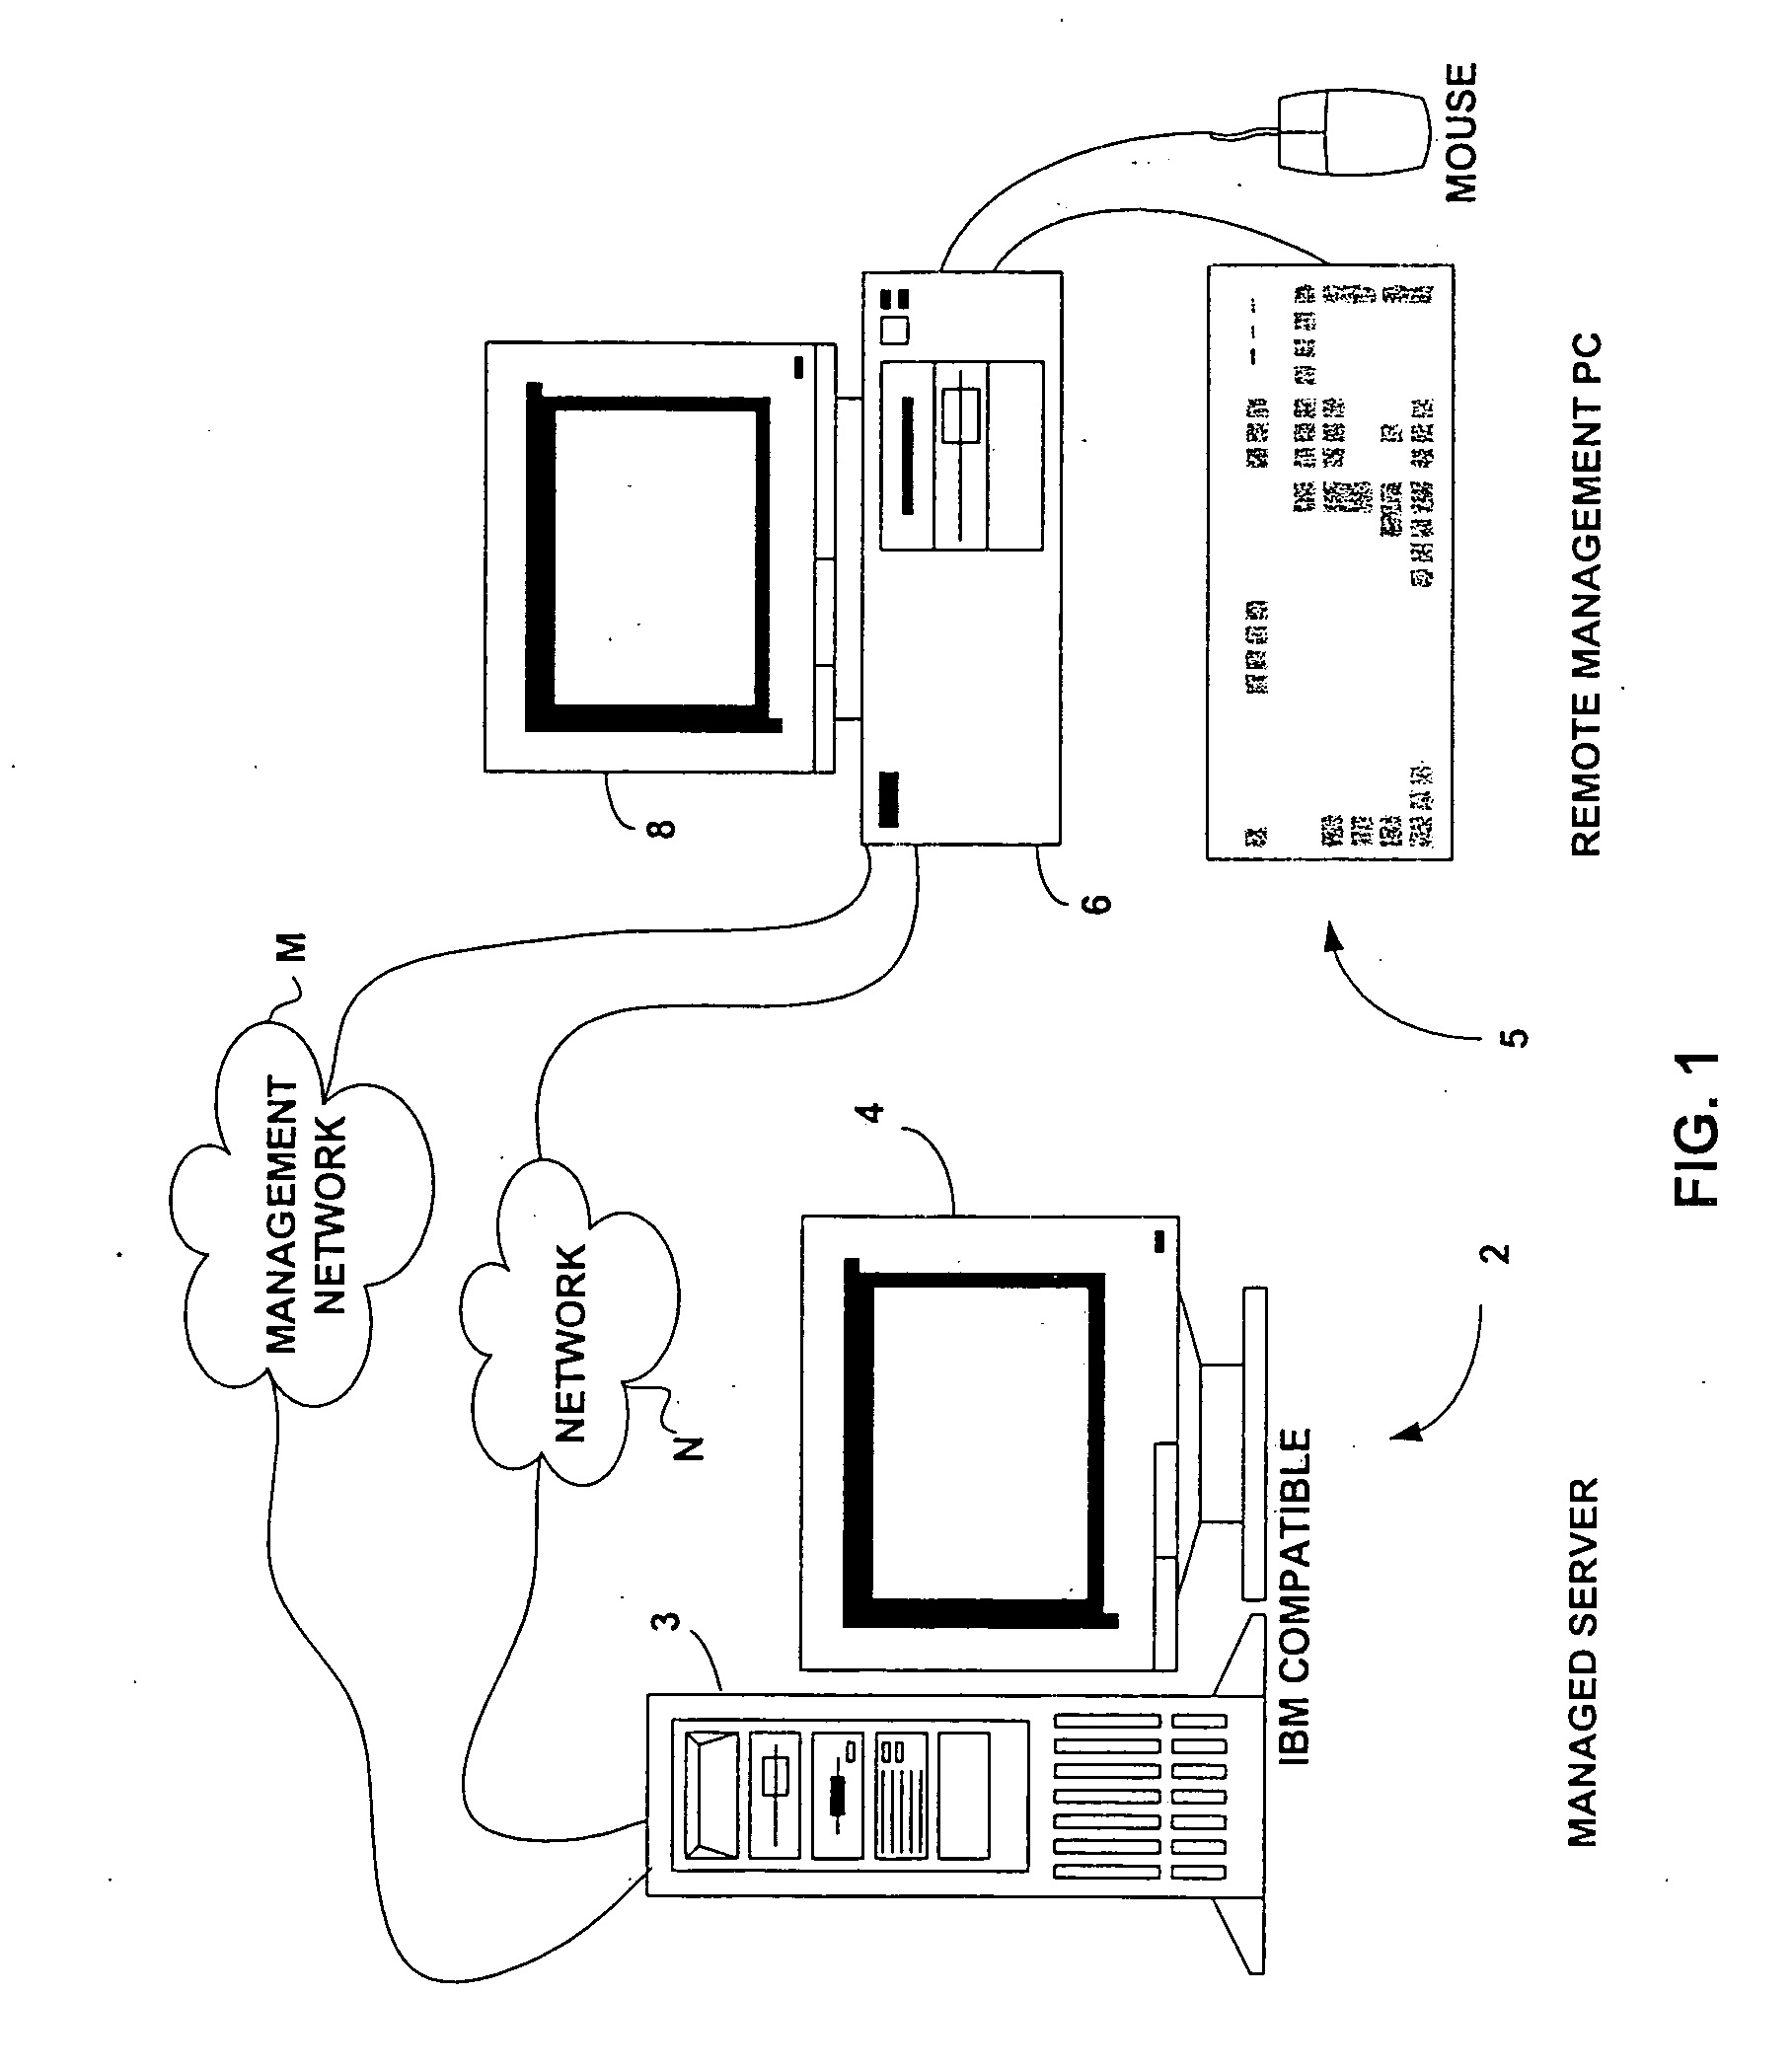 Method and apparatus for implementing color graphics on a remote computer